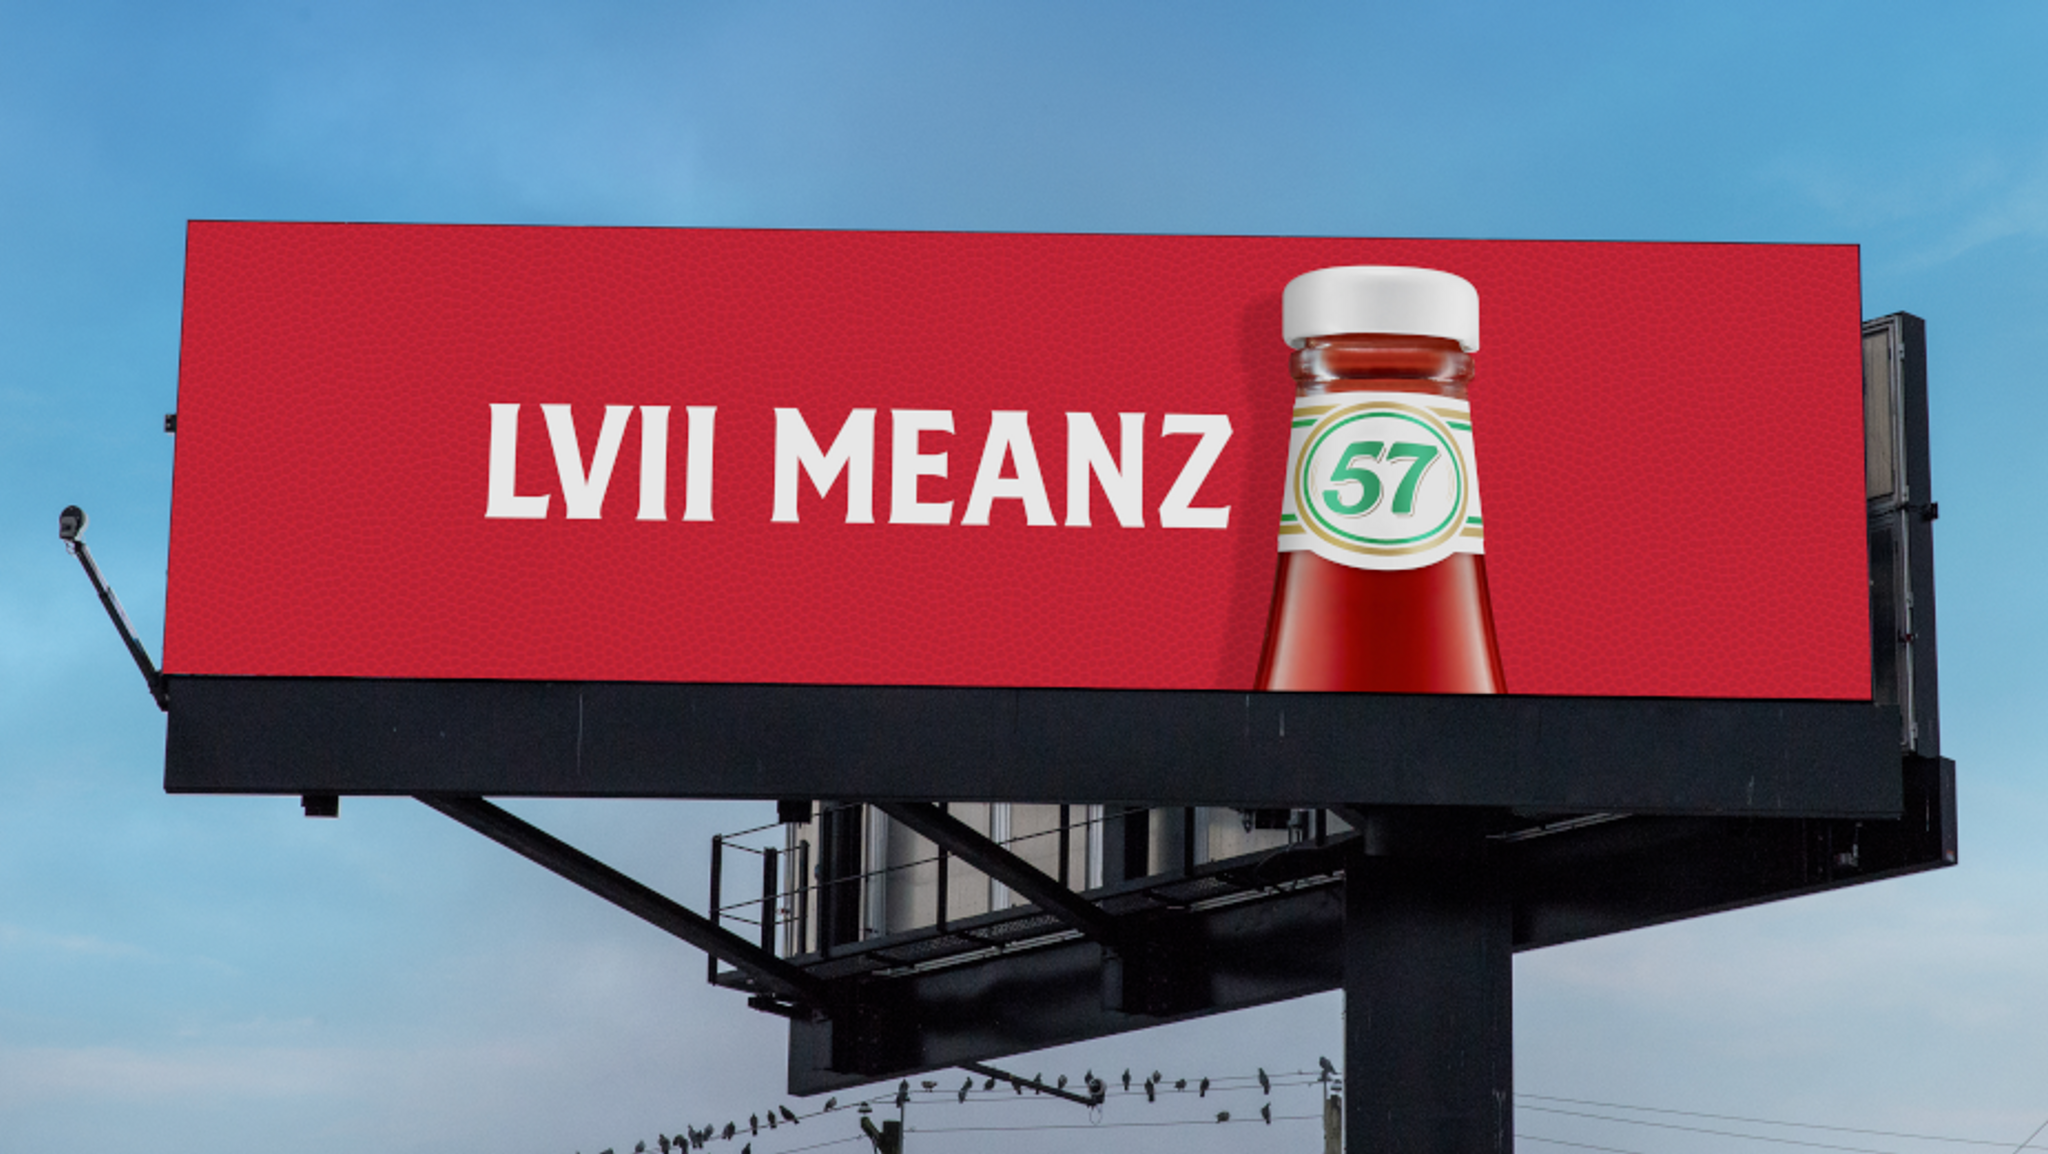 HEINZ uplifts fans voices with humorous campaign